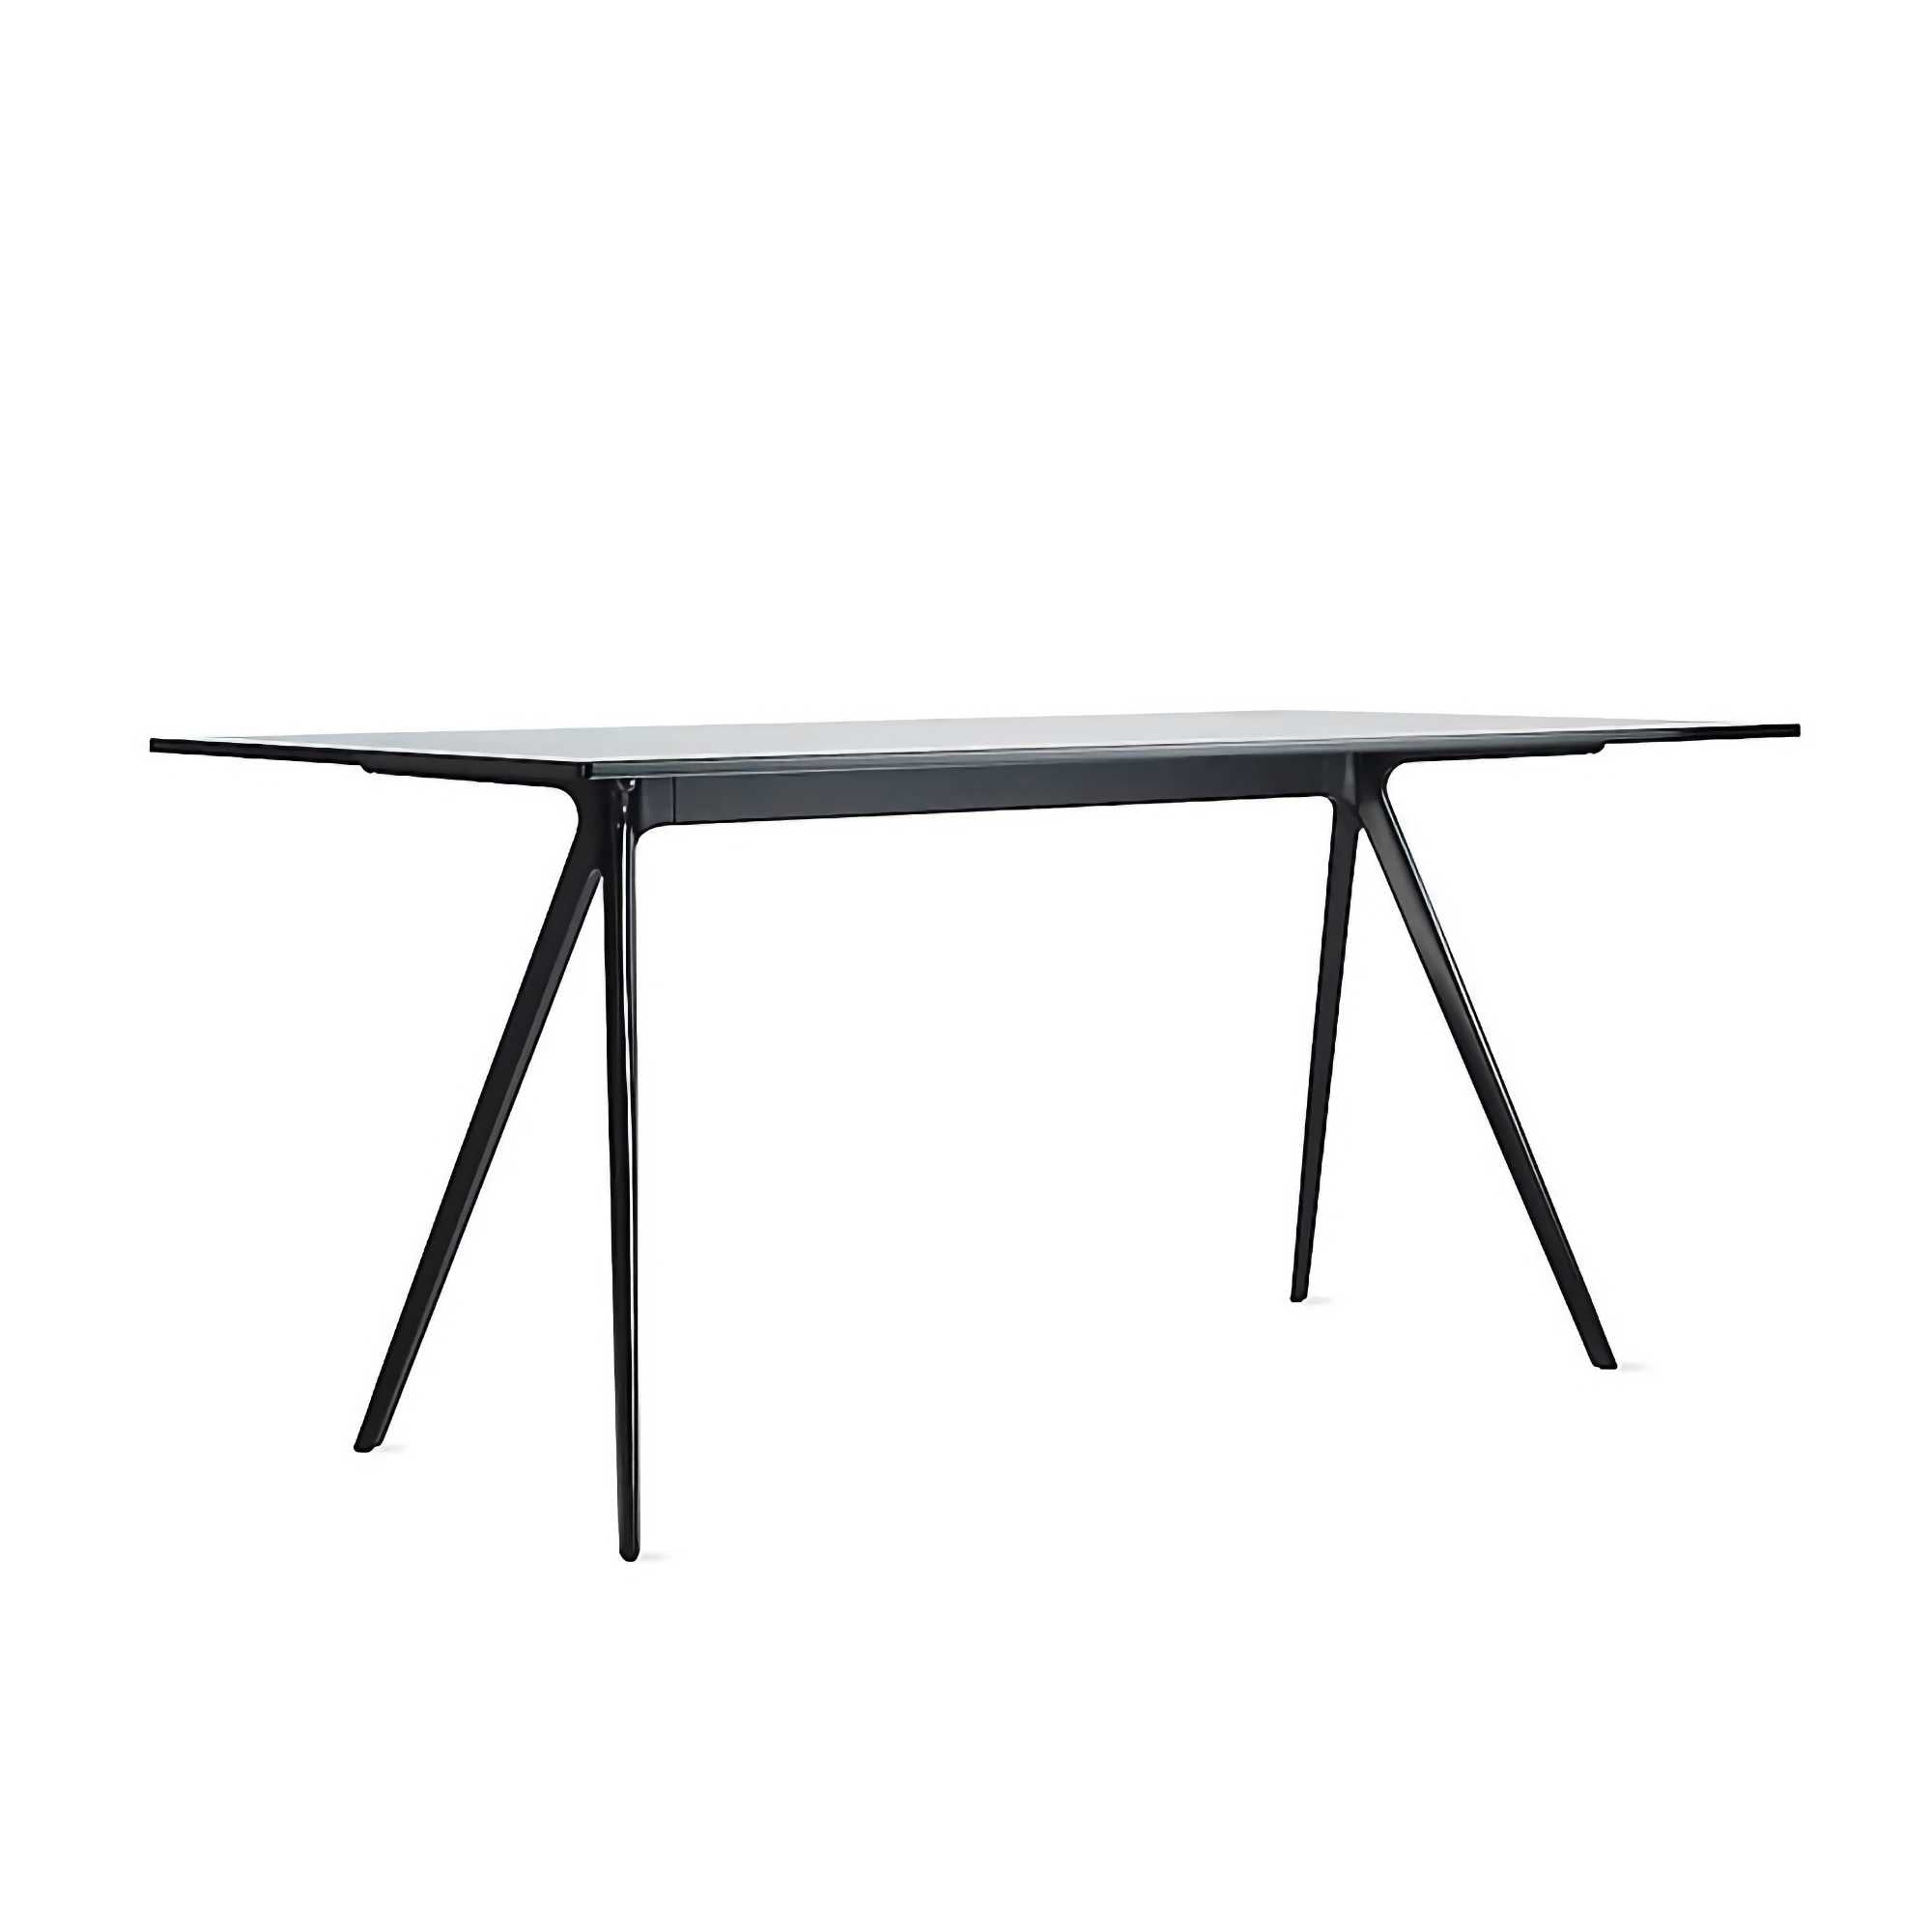 Magis Baguette Table, tempered smoked glass/black (160x85cm)